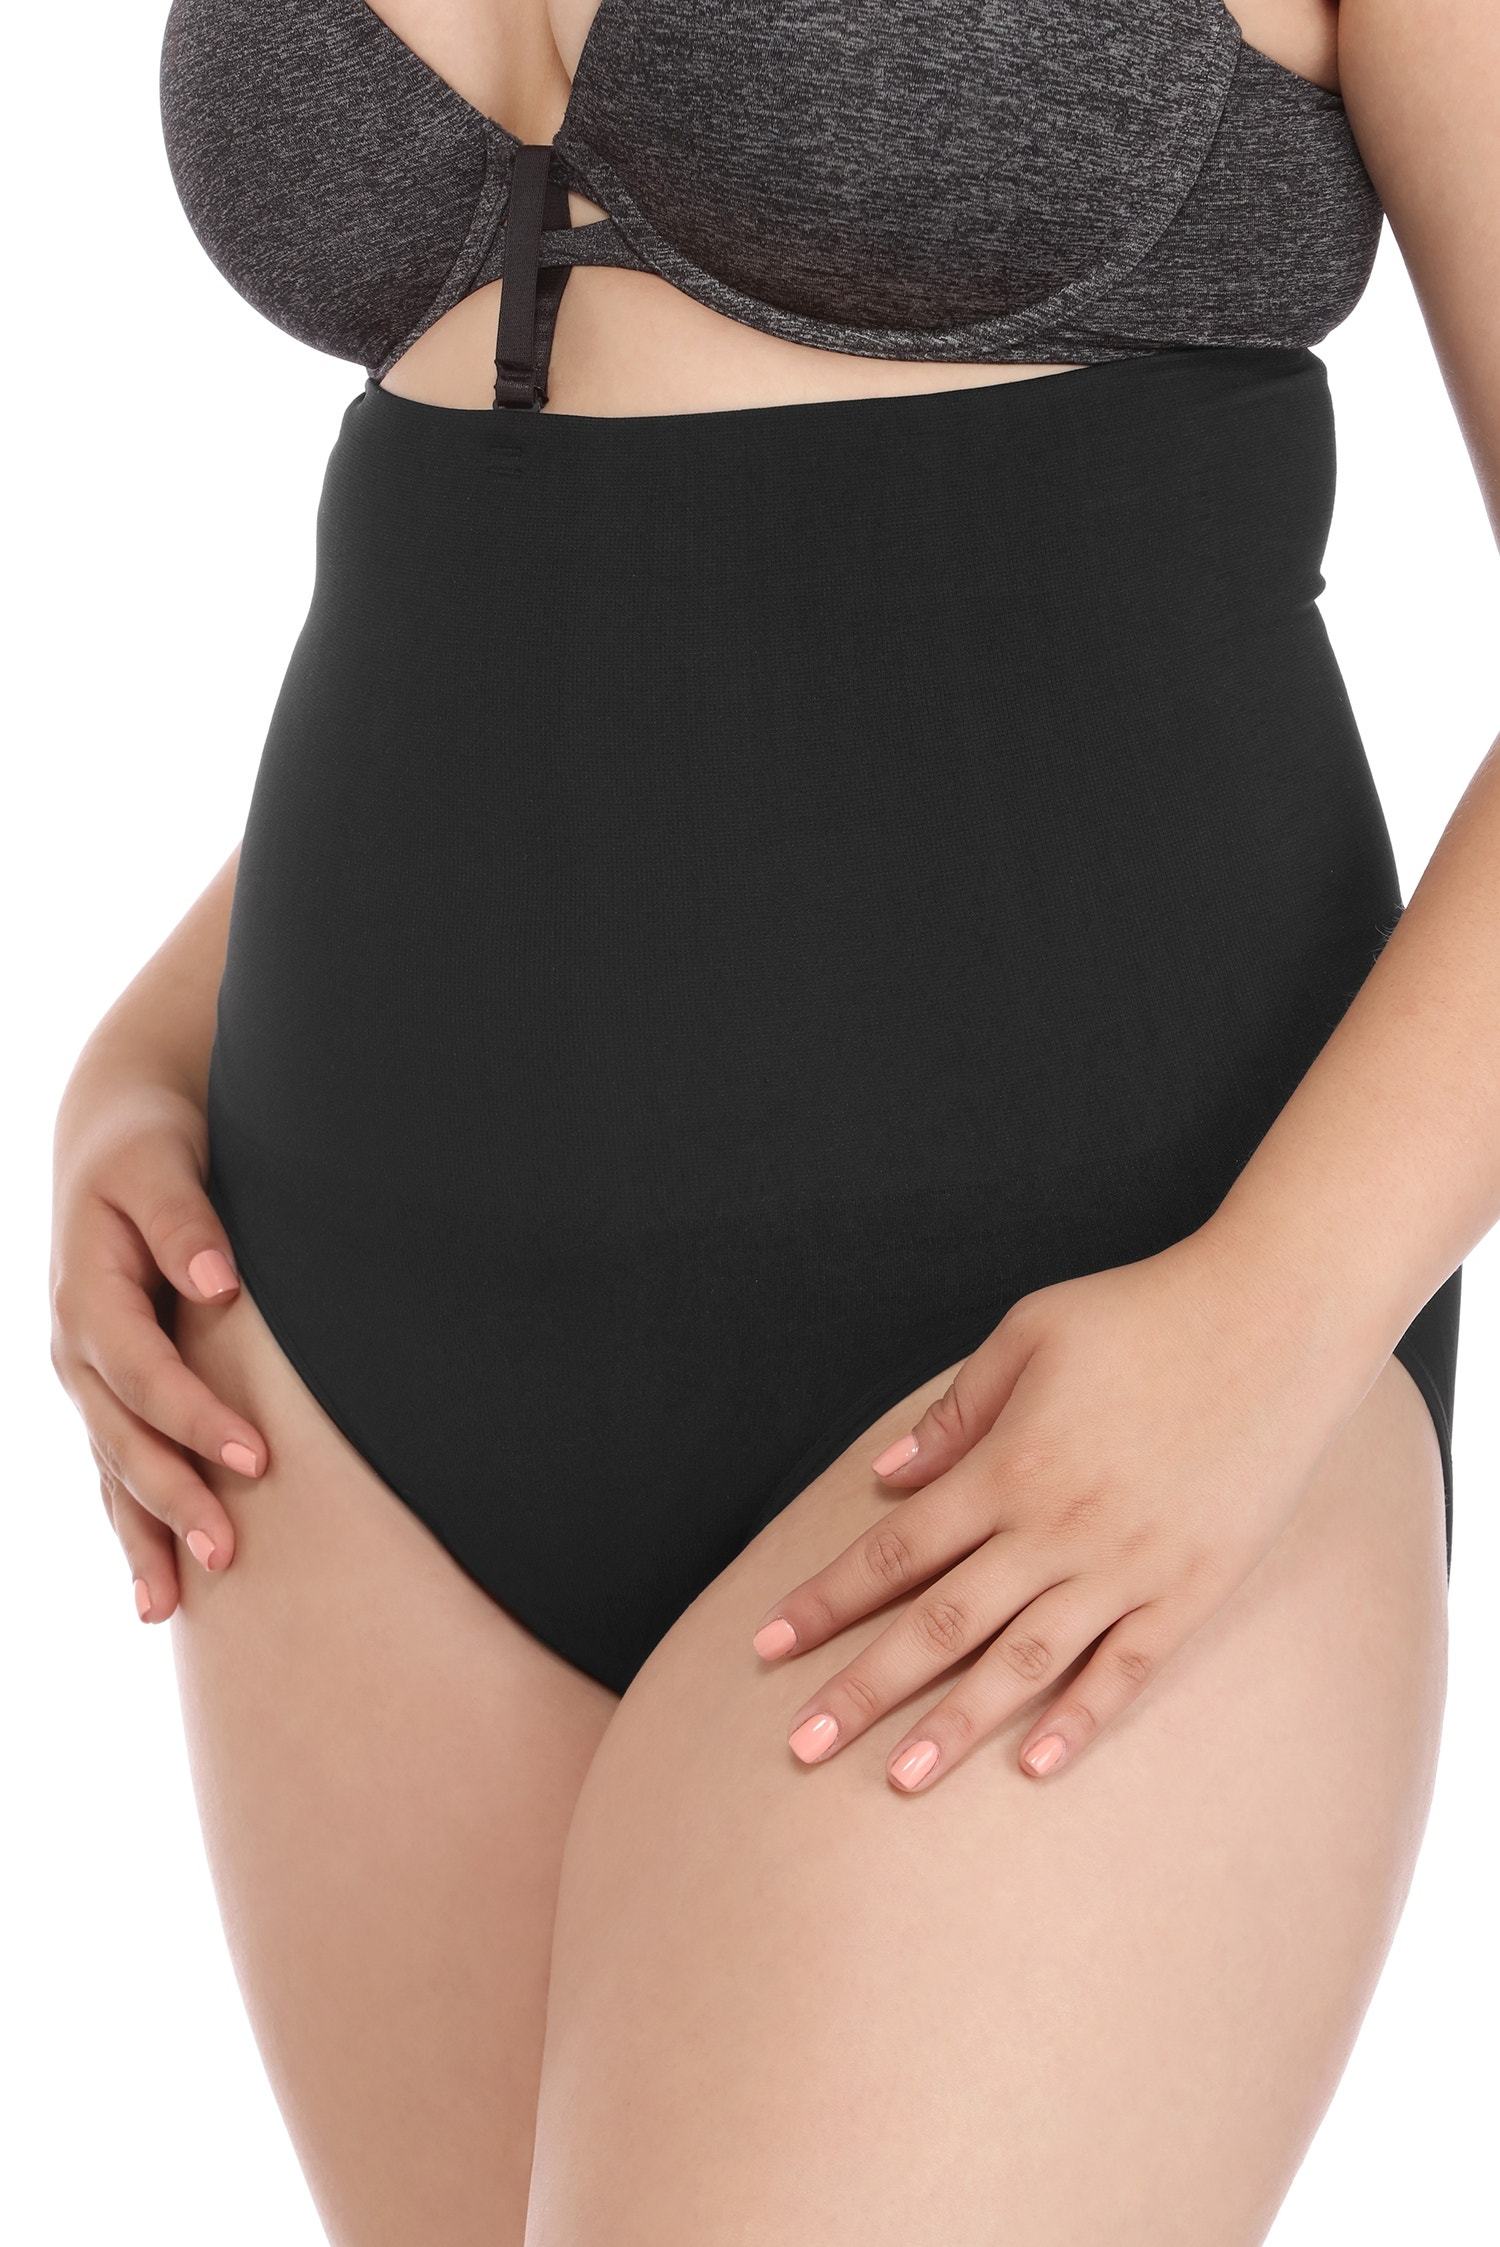 Plus High Waist Shaper Brief - Lady Occasions